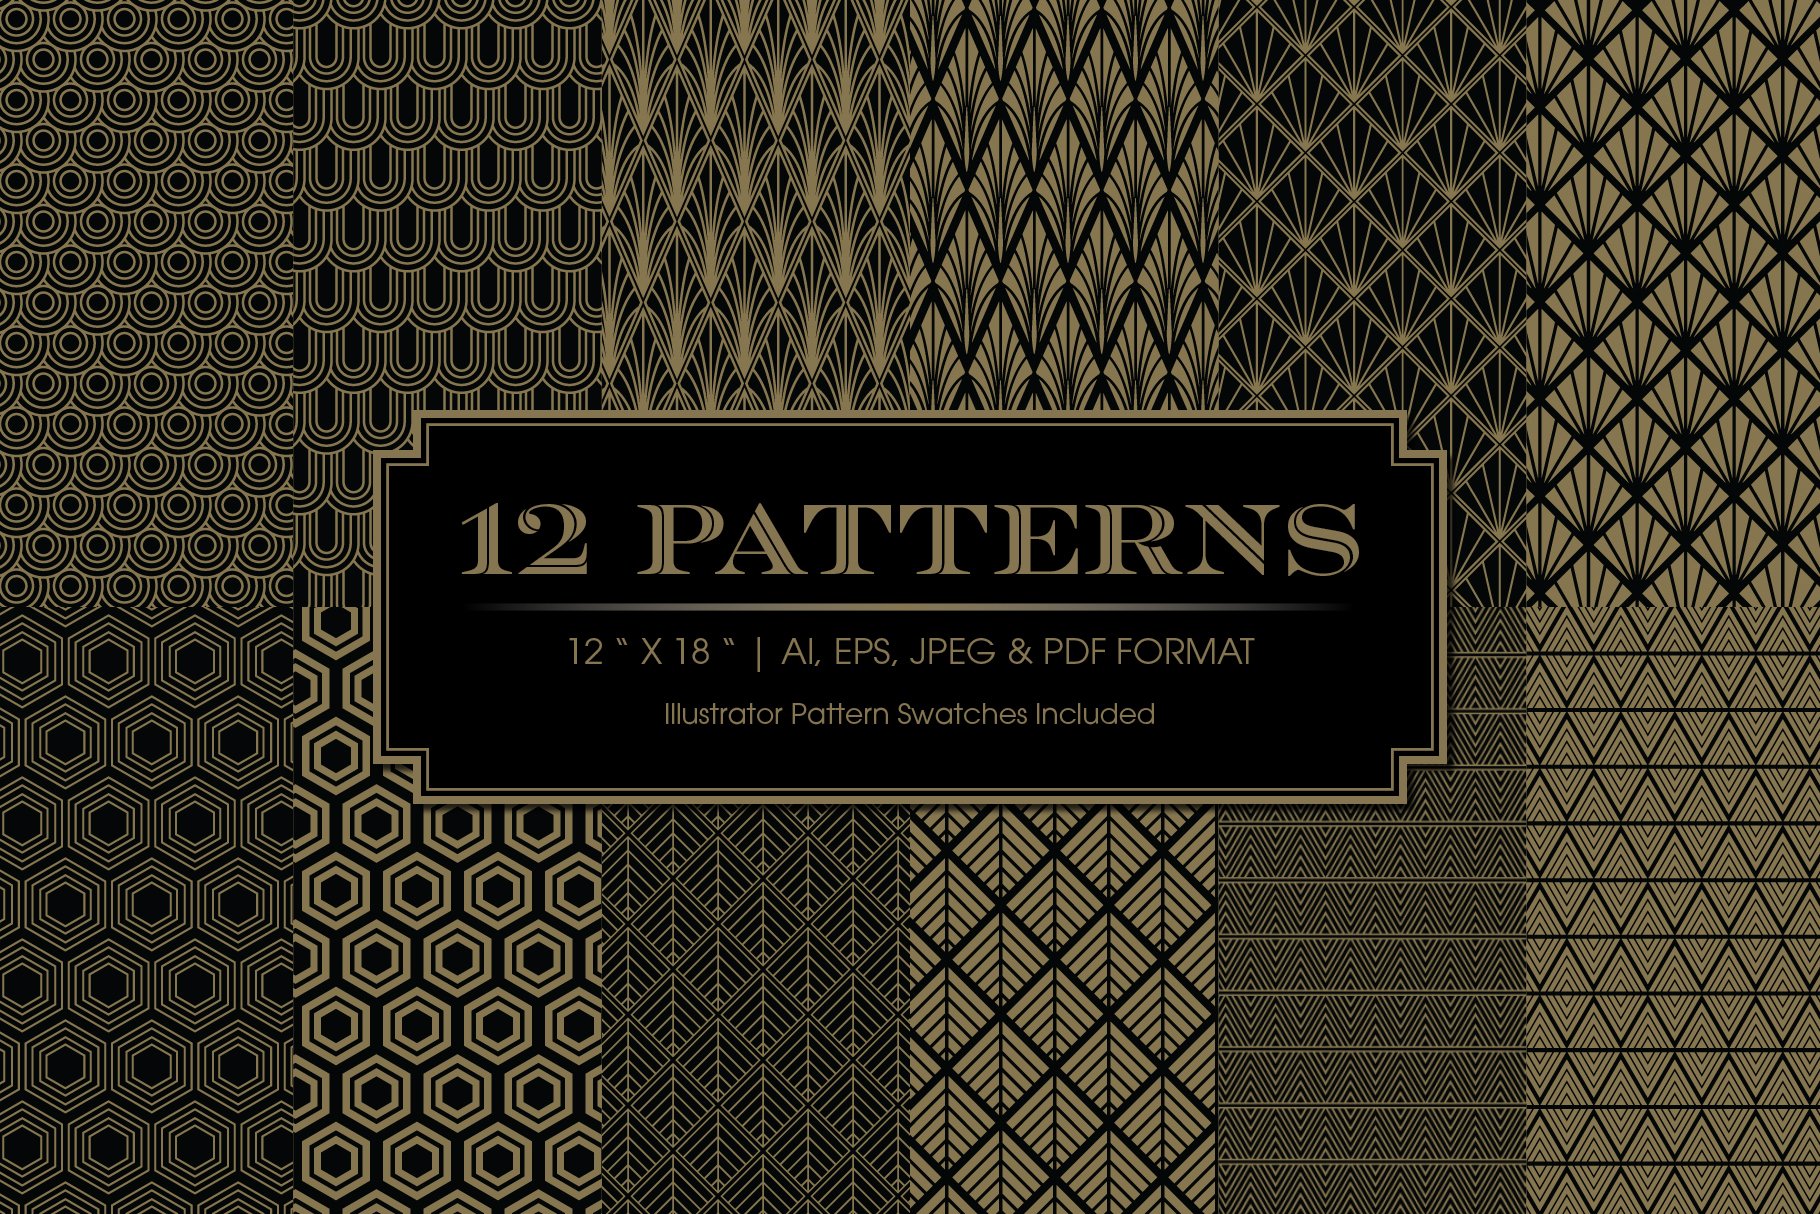 Art Deco Invitations and Patterns